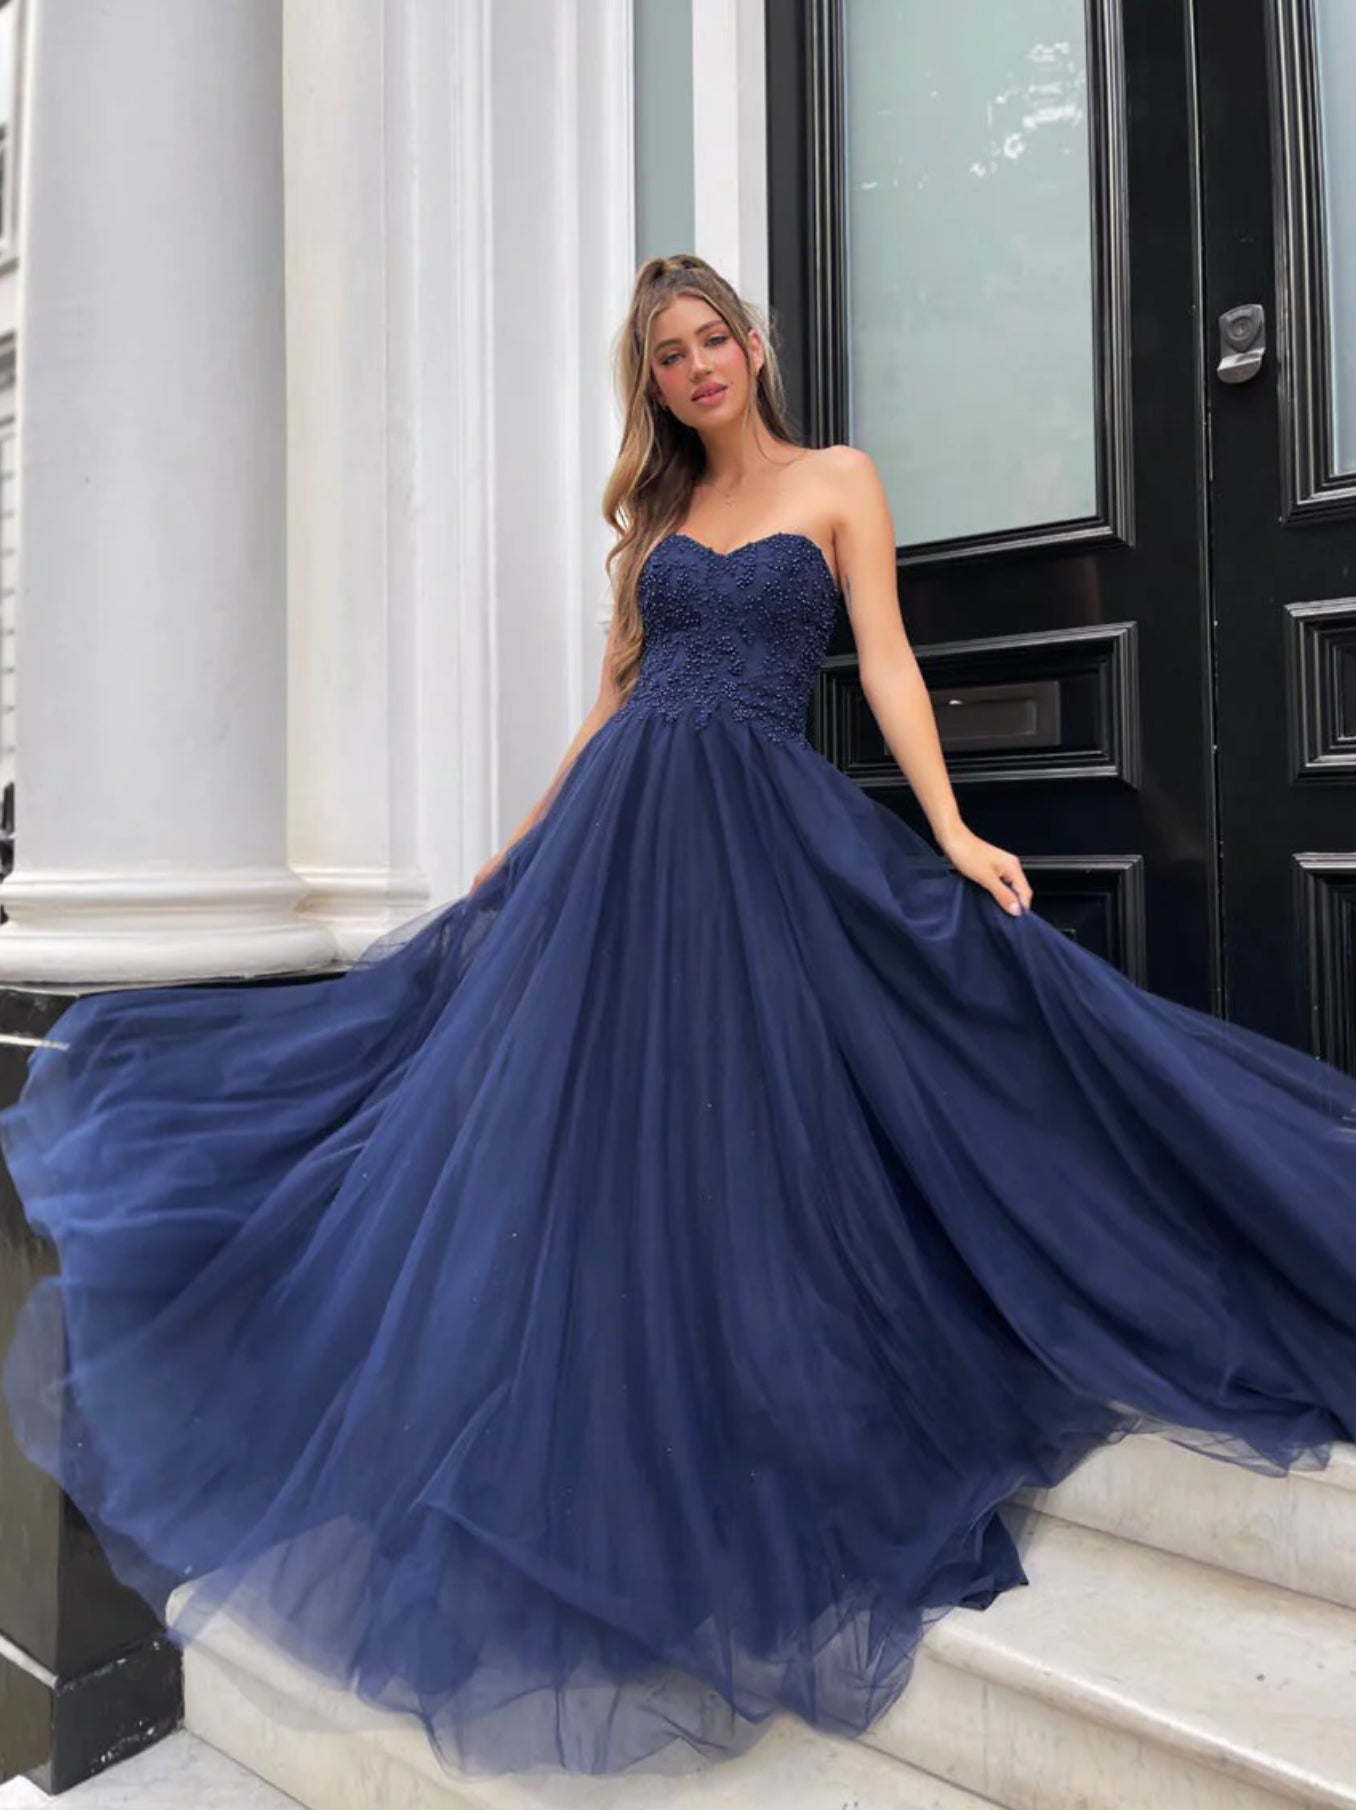 JP132 by Jadore Lilac, Navy & White Formal gown